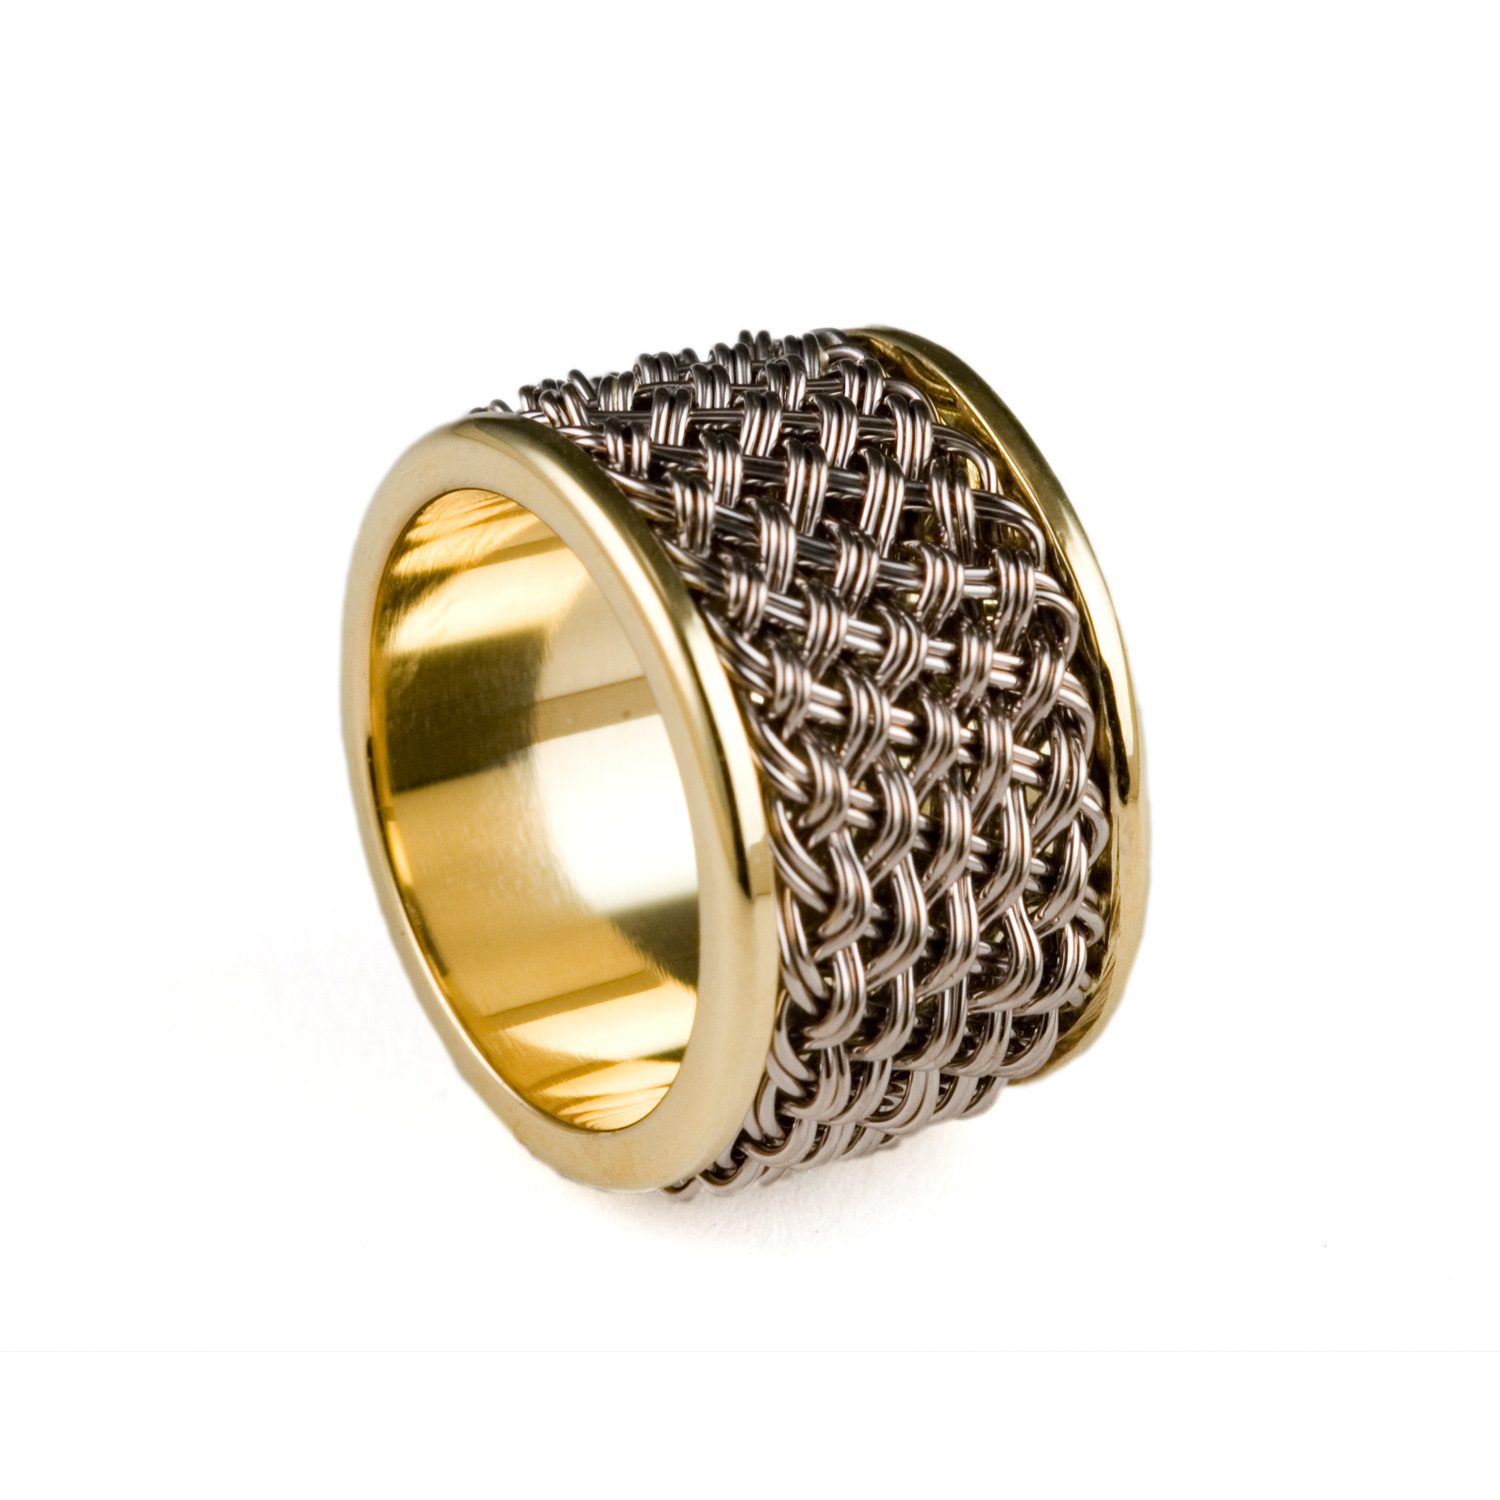 Inset Weave Ring 14mm 18k white & yellow gold by Tamberlaine